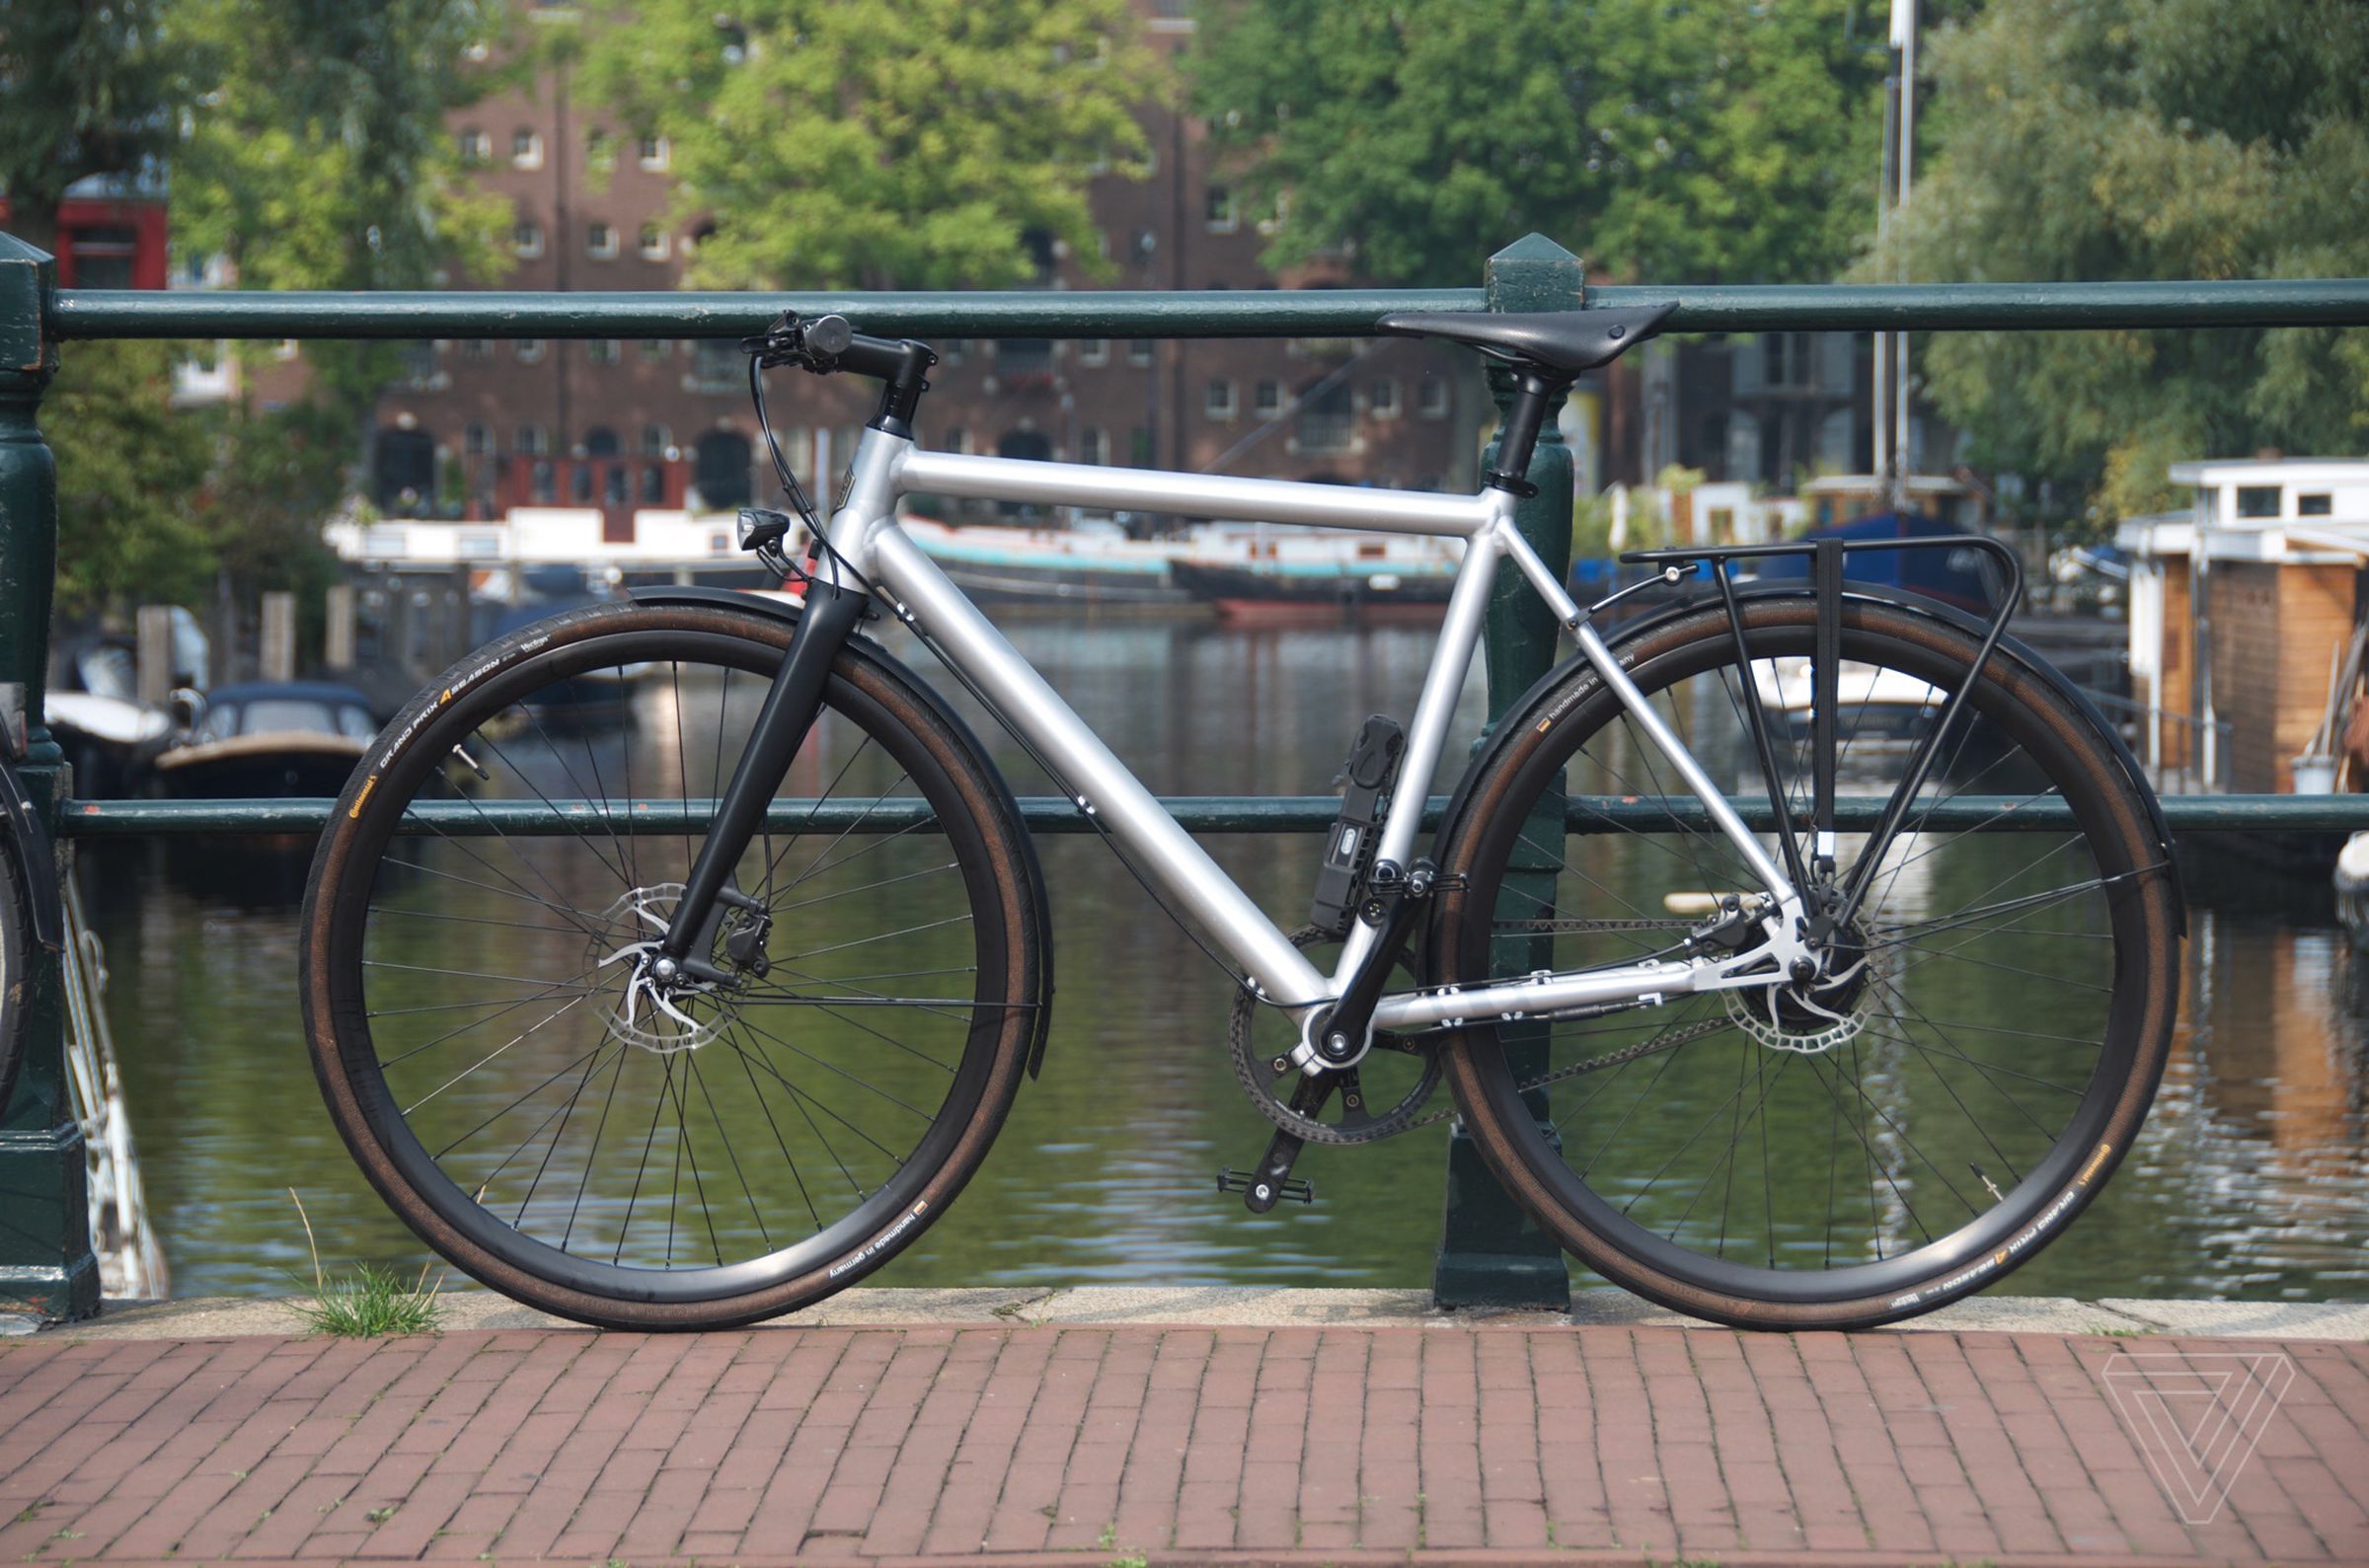 Ampler Curt at rest in Amsterdam.